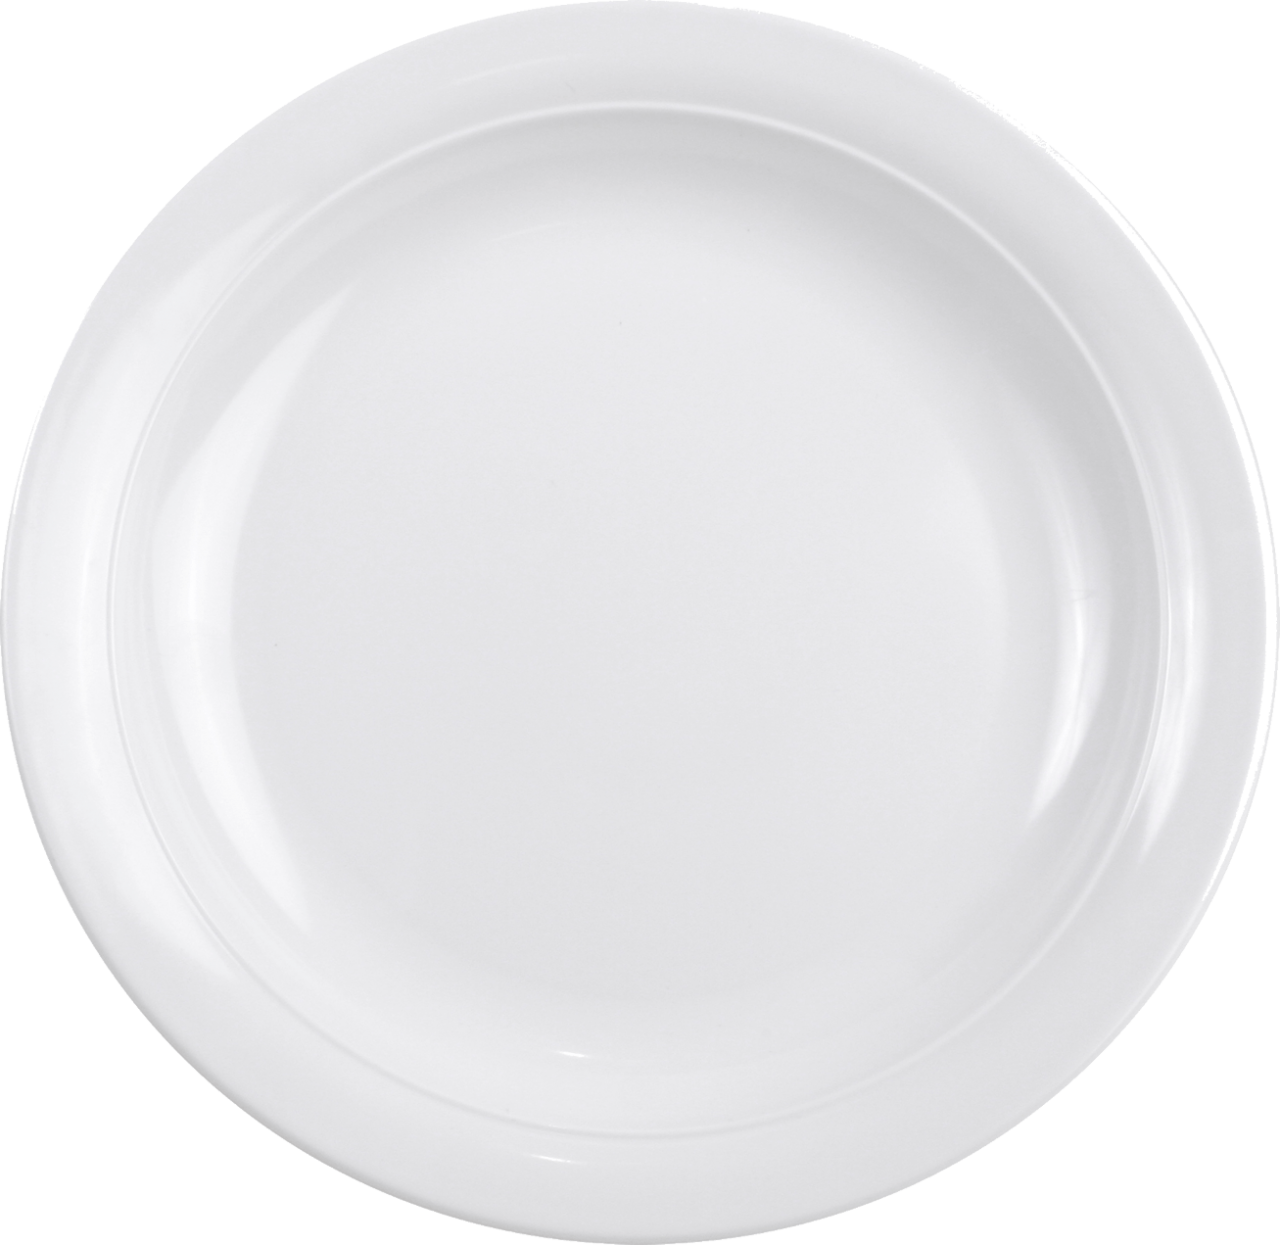  White  Plate  PNG Image PurePNG Free transparent  CC0 PNG 